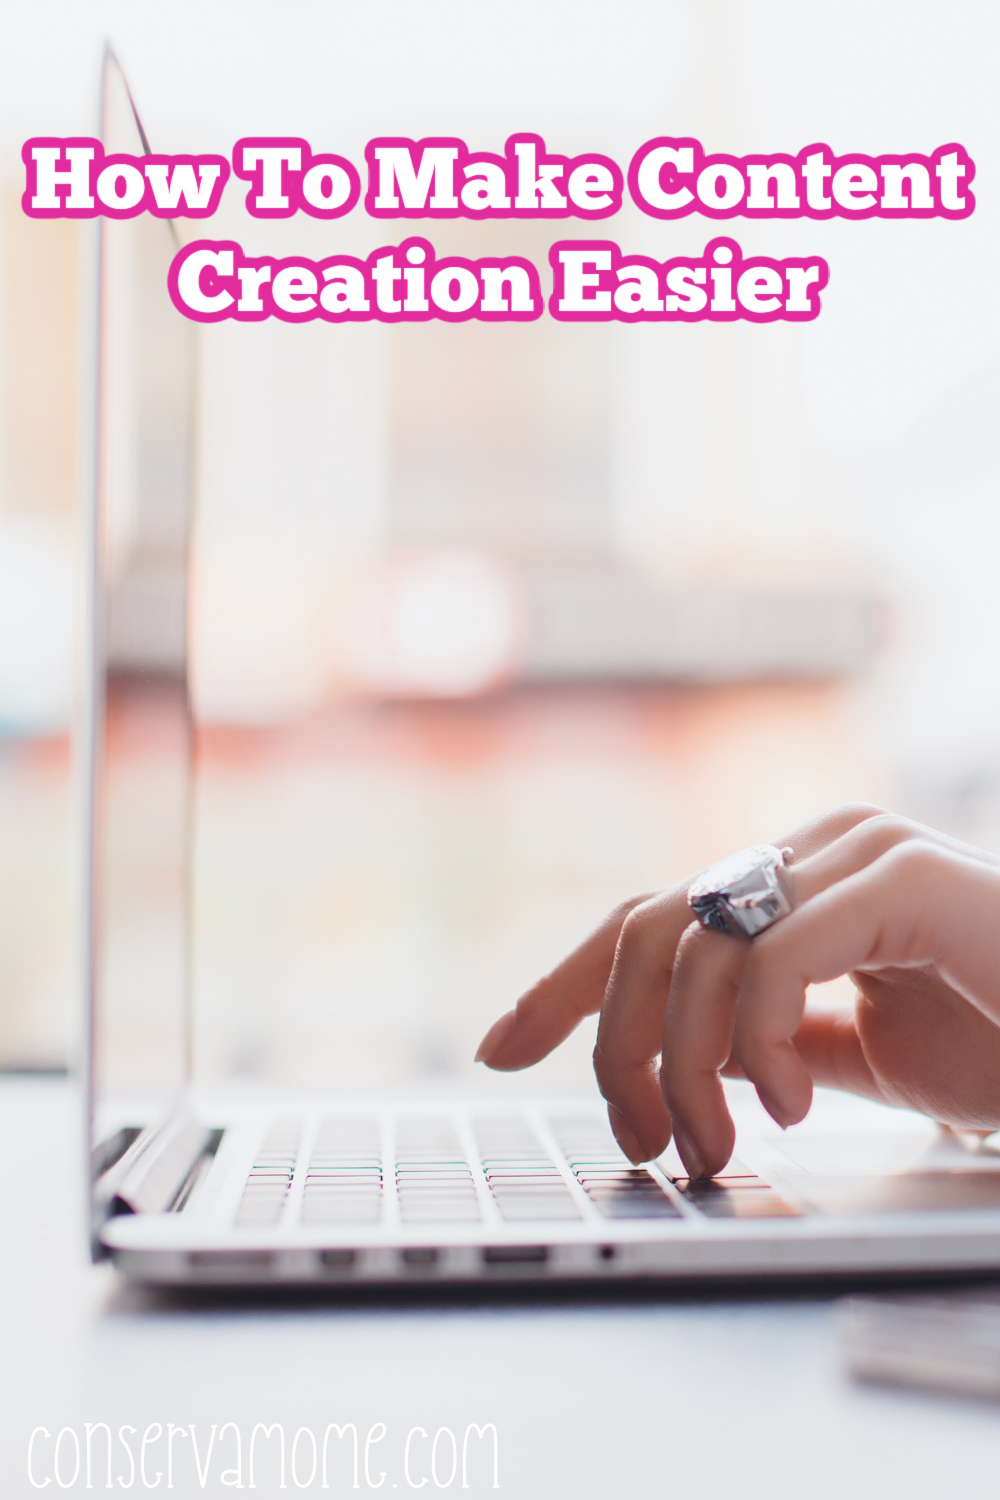 How To Make Content Creation Easier